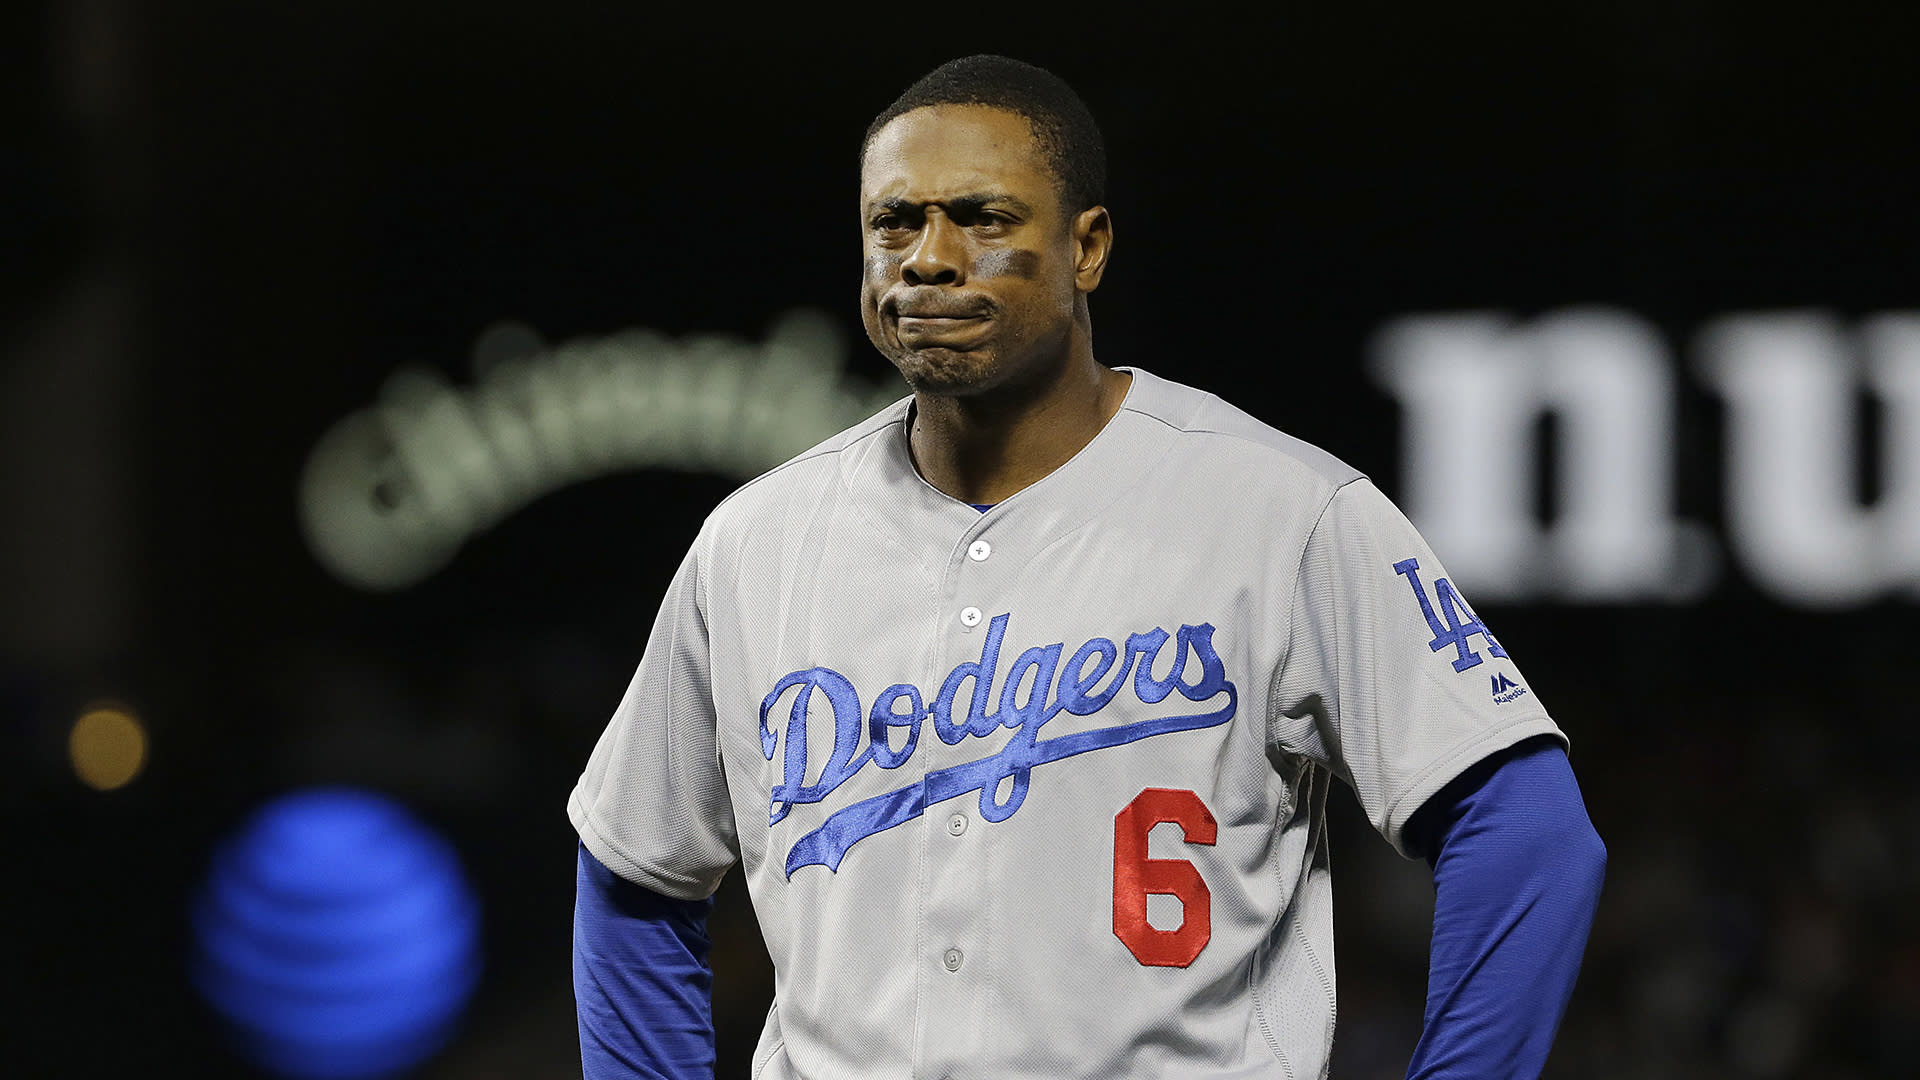 Video: Why the Dodgers losing streak doesn't matter all that much